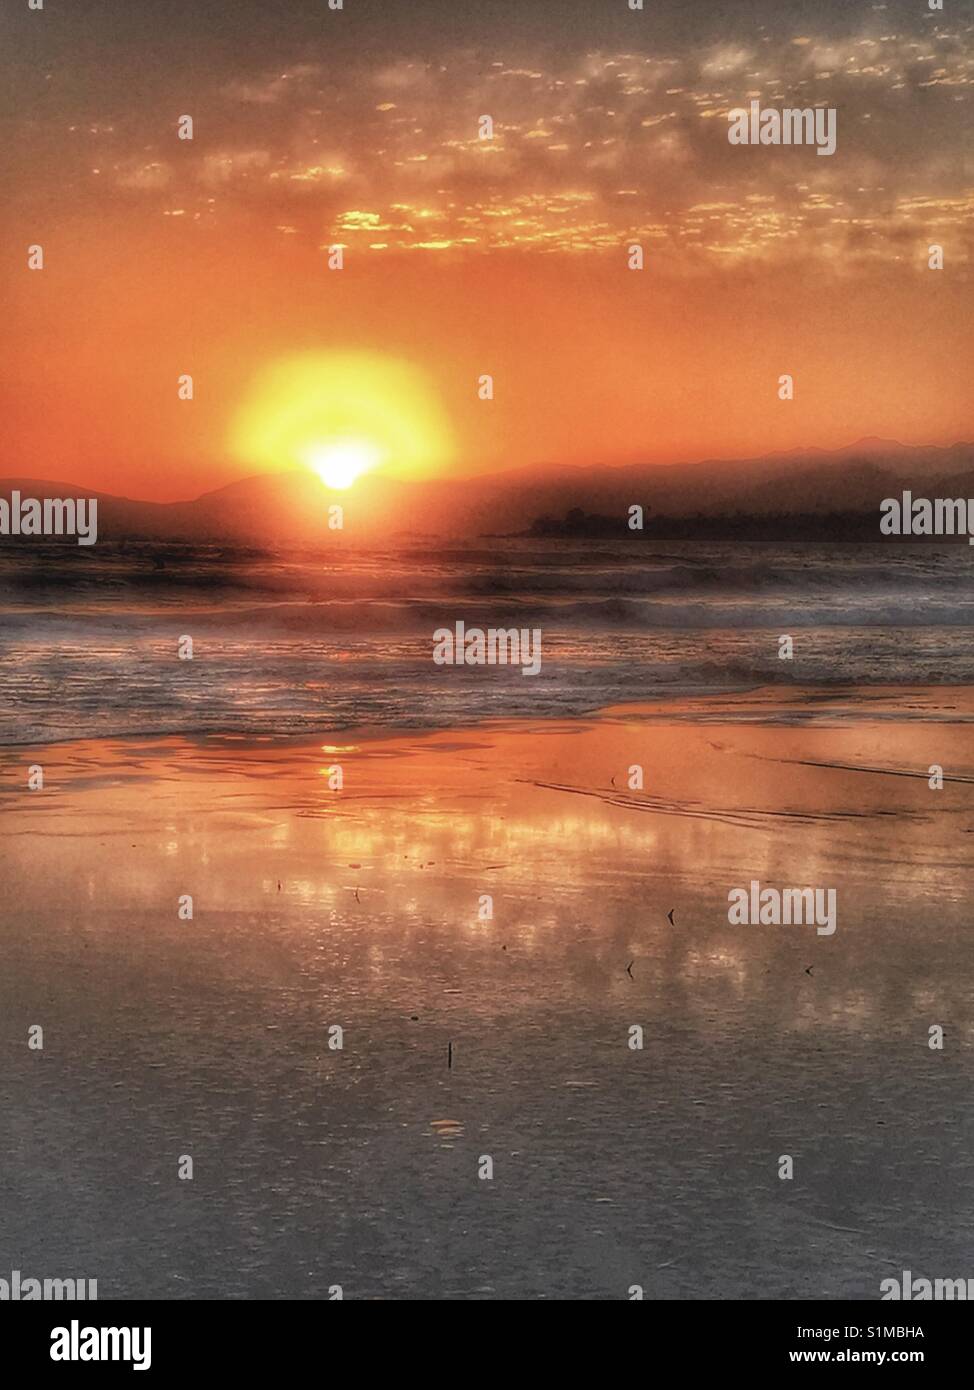 Looking out from the beach at stunning orange sunset over the ocean waves. West coast, California, United States Stock Photo